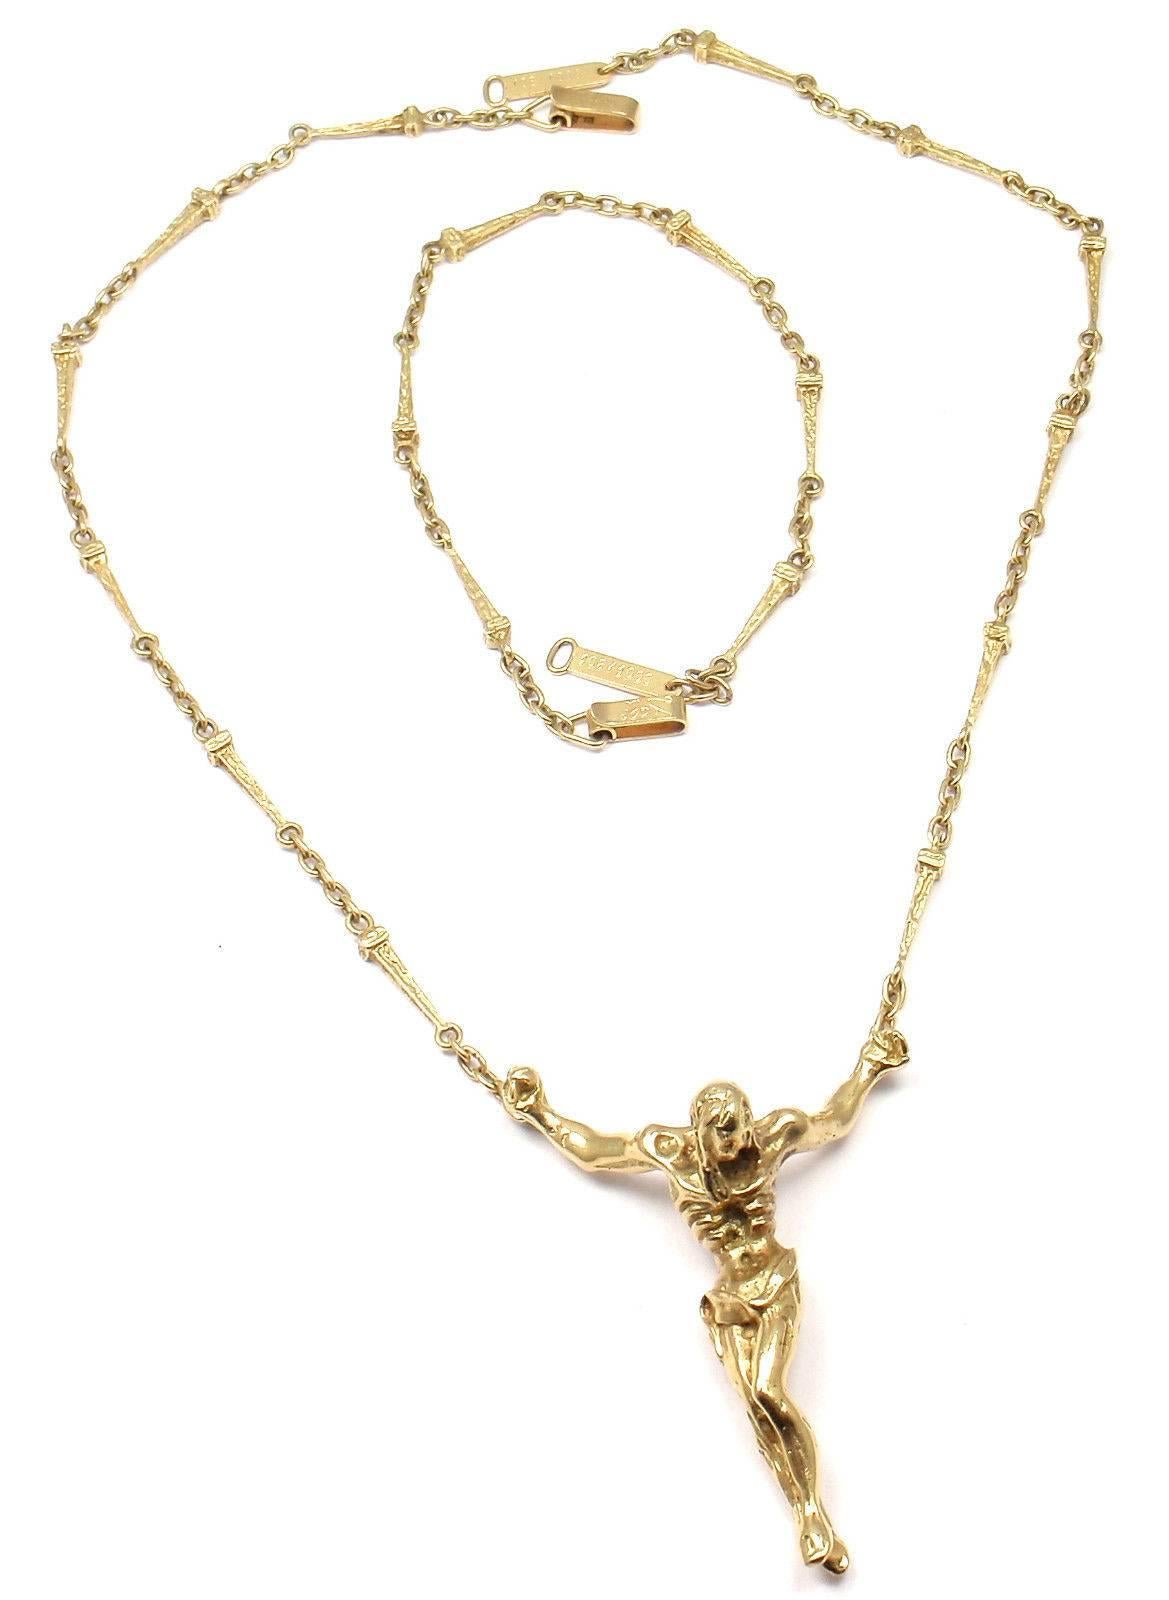 Limited Edition 18k Yellow Gold Salvador Dali Christ Saint John On The Cross Bracelet Necklace Set.
This is a limited edition numbered piece from 1970's, number 108 out of 1000 ever made.

This necklace comes with a pouch.

Details:
Length: